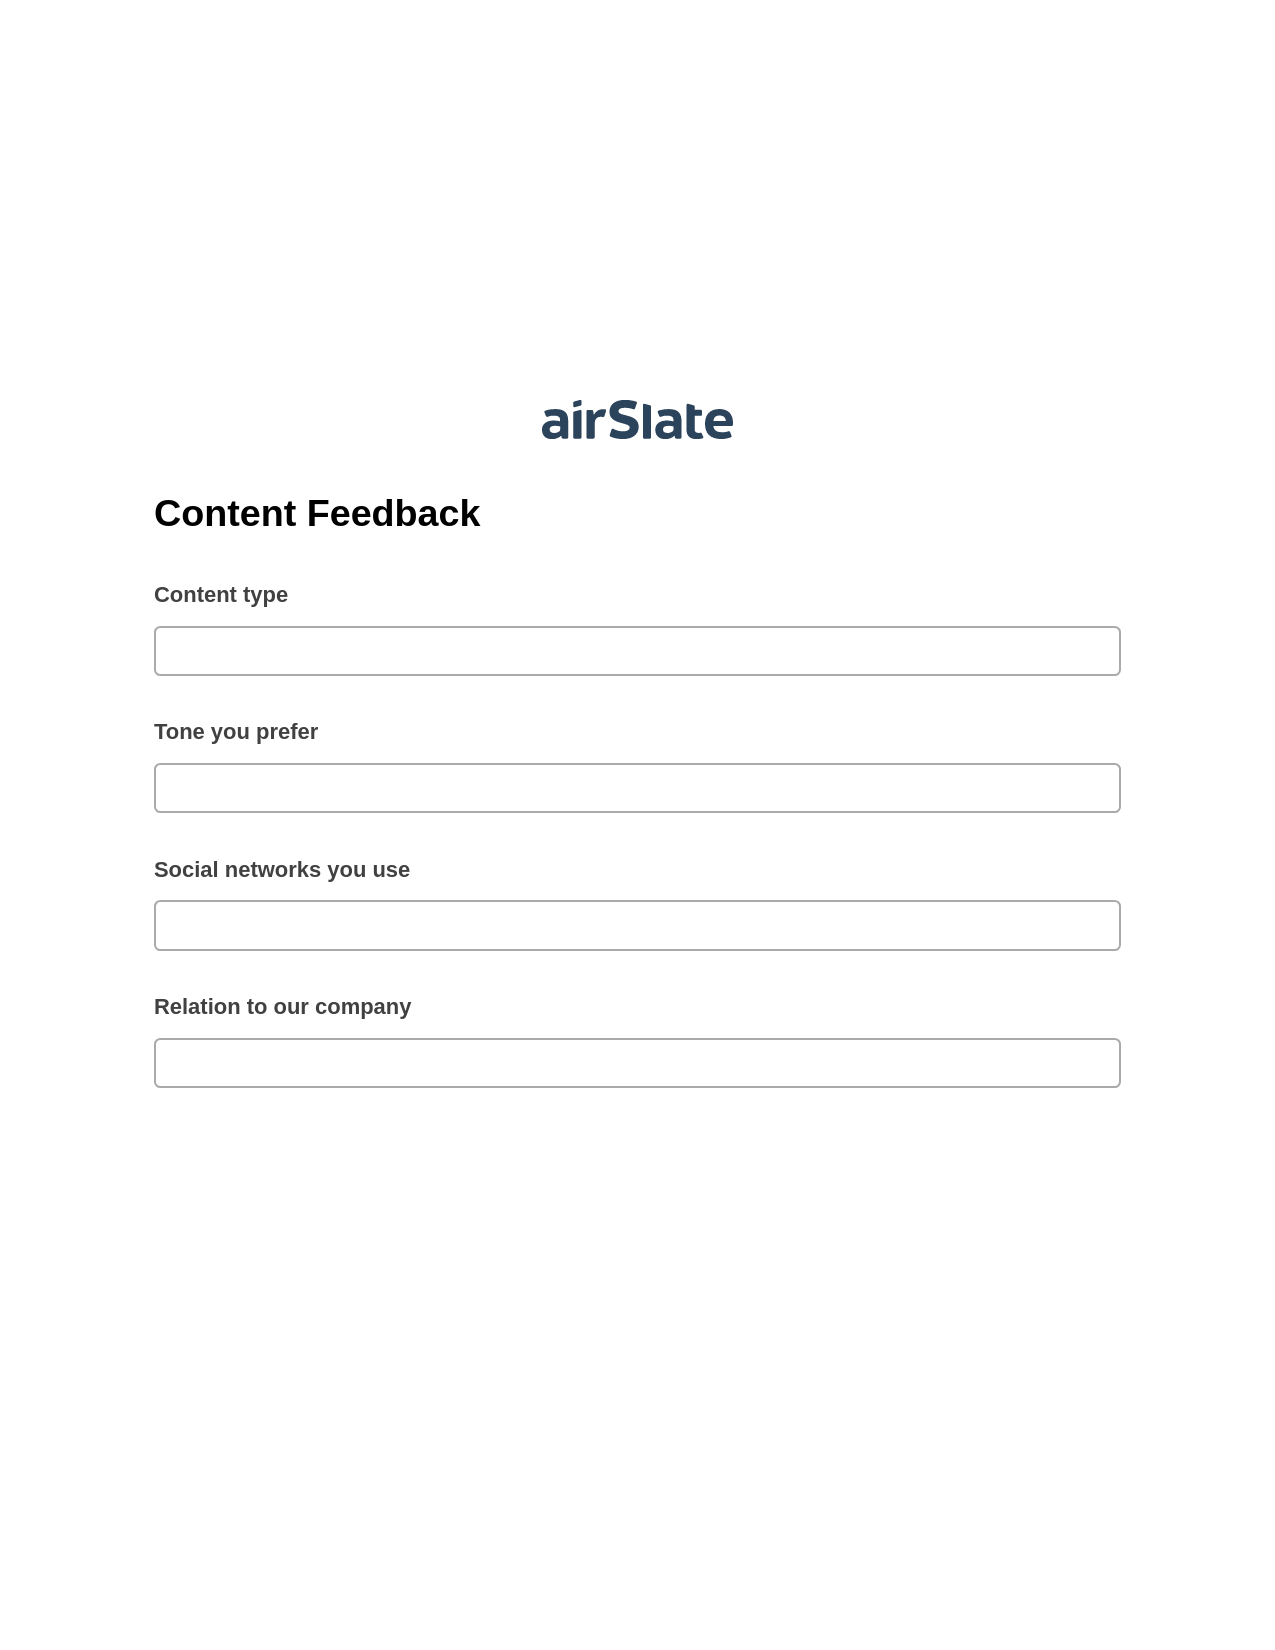 Content Feedback Pre-fill Slate from MS Dynamics 365 Records Bot, Mailchimp add recipient to audience Bot, Export to Excel 365 Bot